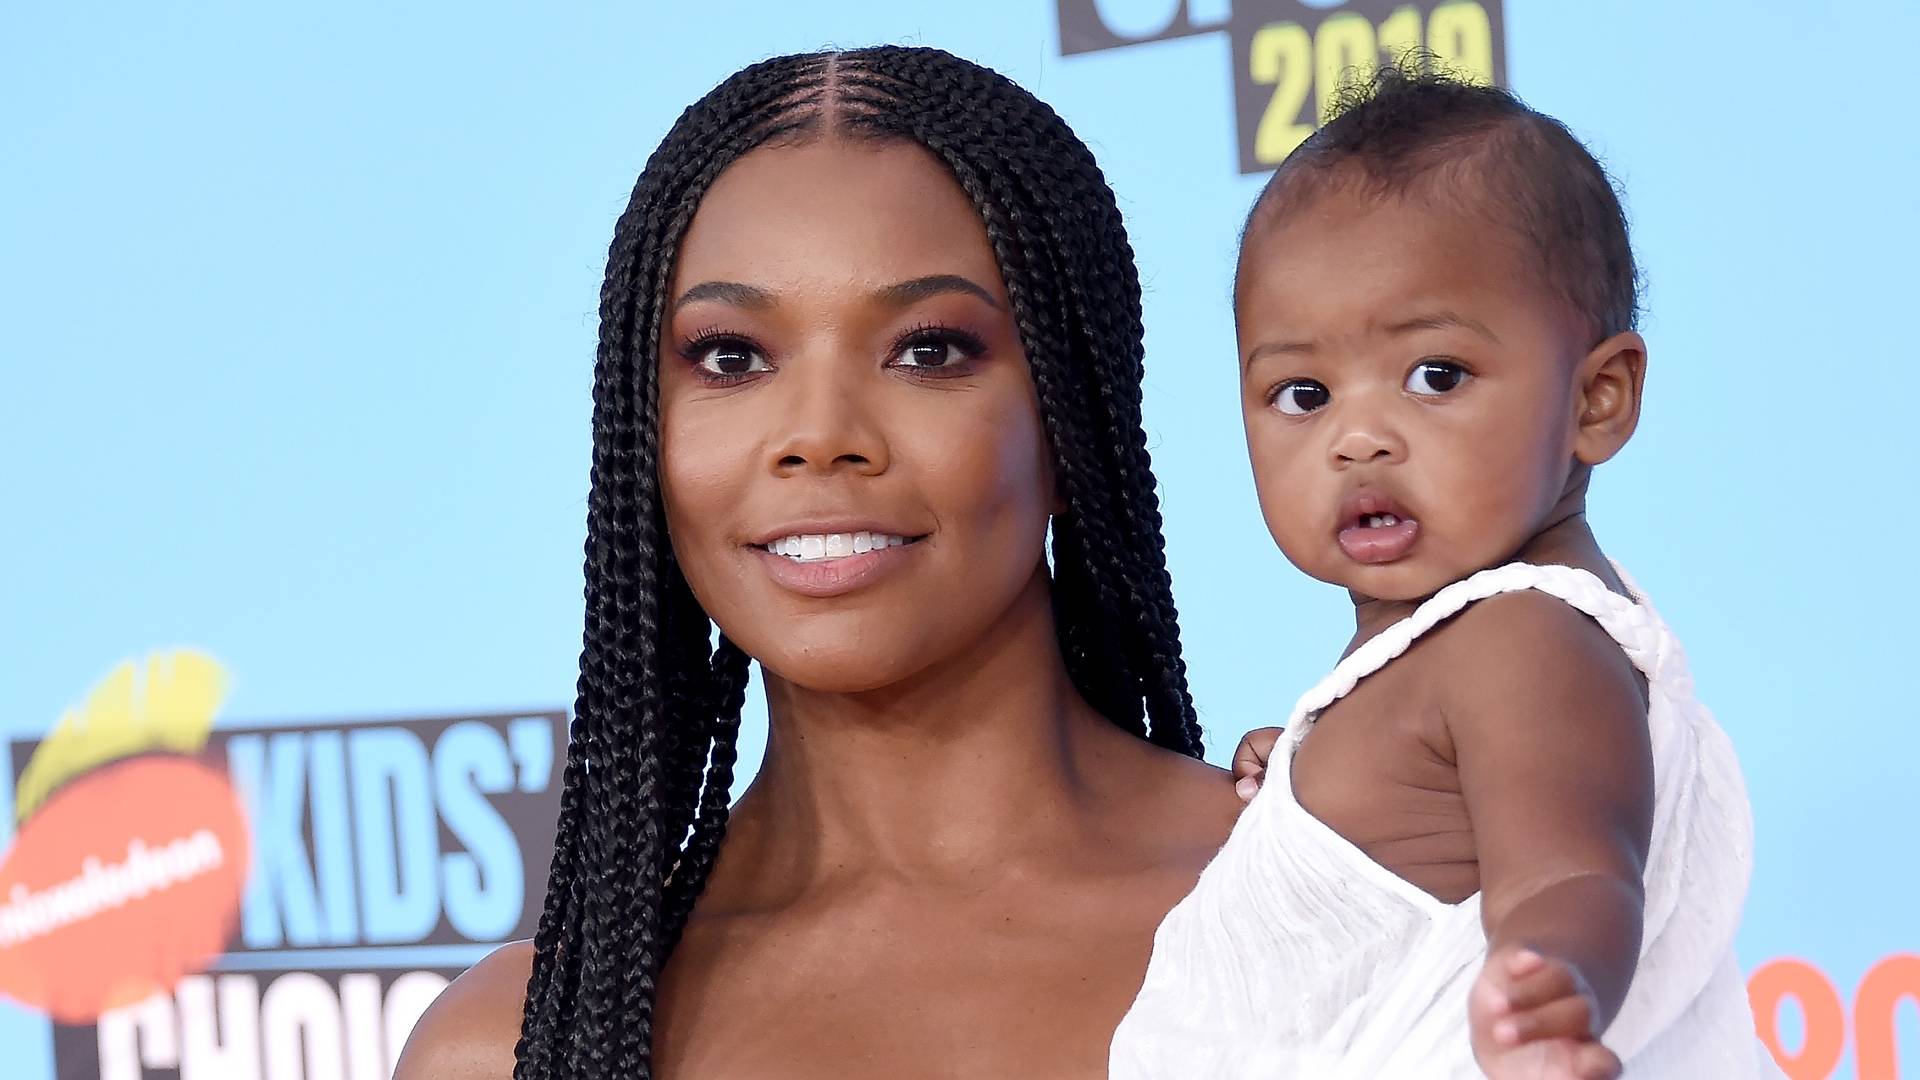 Gabrielle Union and Kaavia James on BET Buzz 2020.